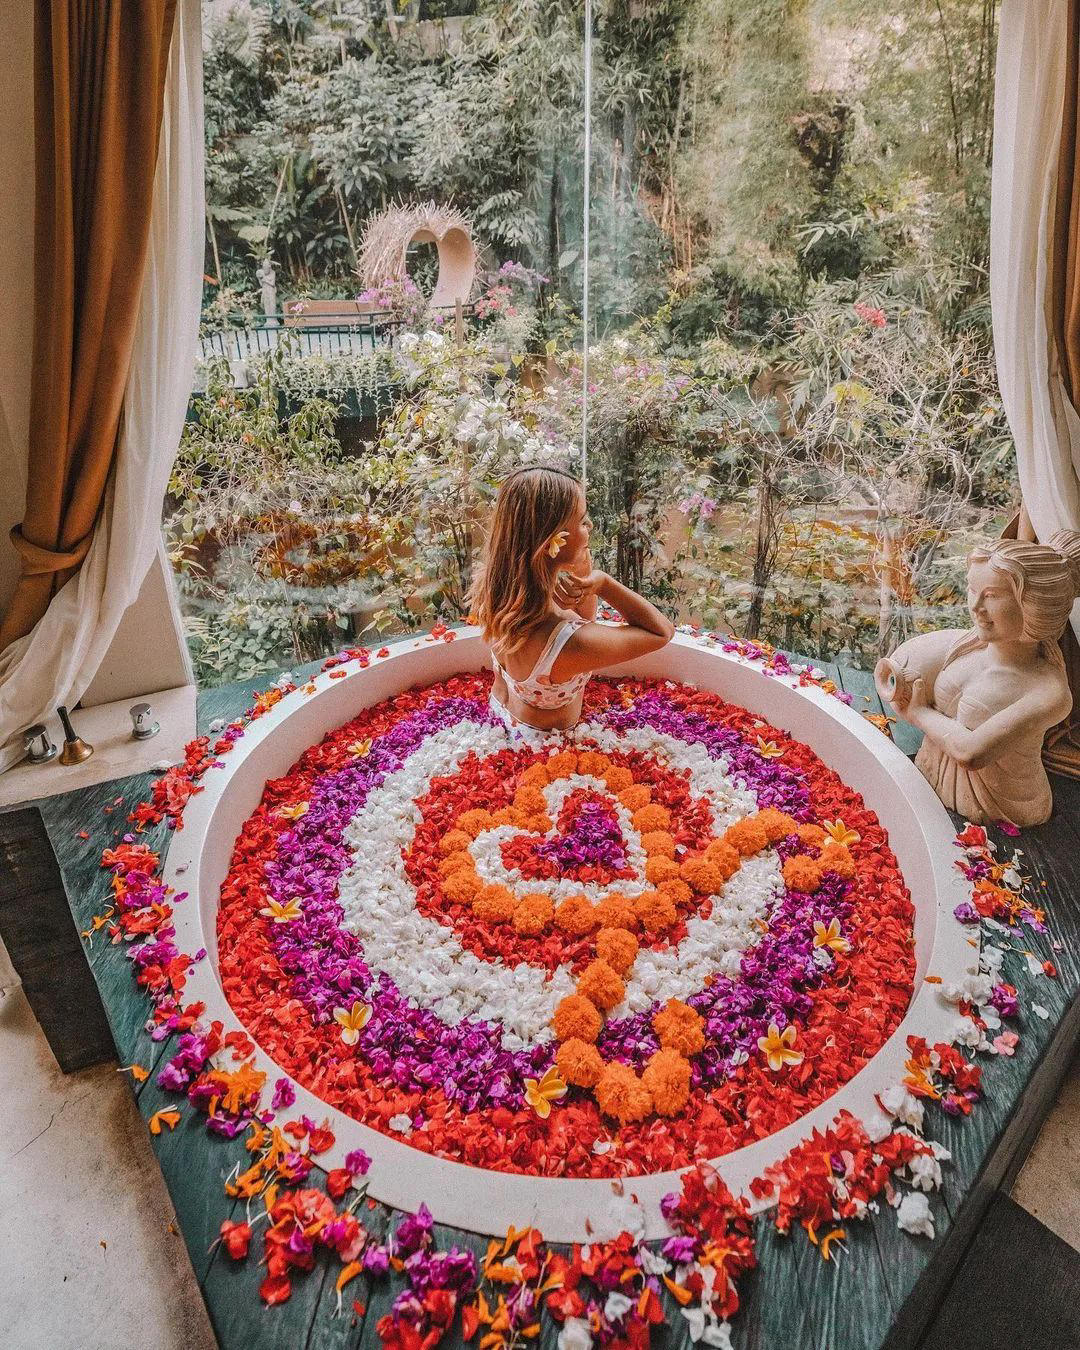 image  1 Best Spa & Flower Bath in Bali - When you get a chance to add more colors to your life, take it